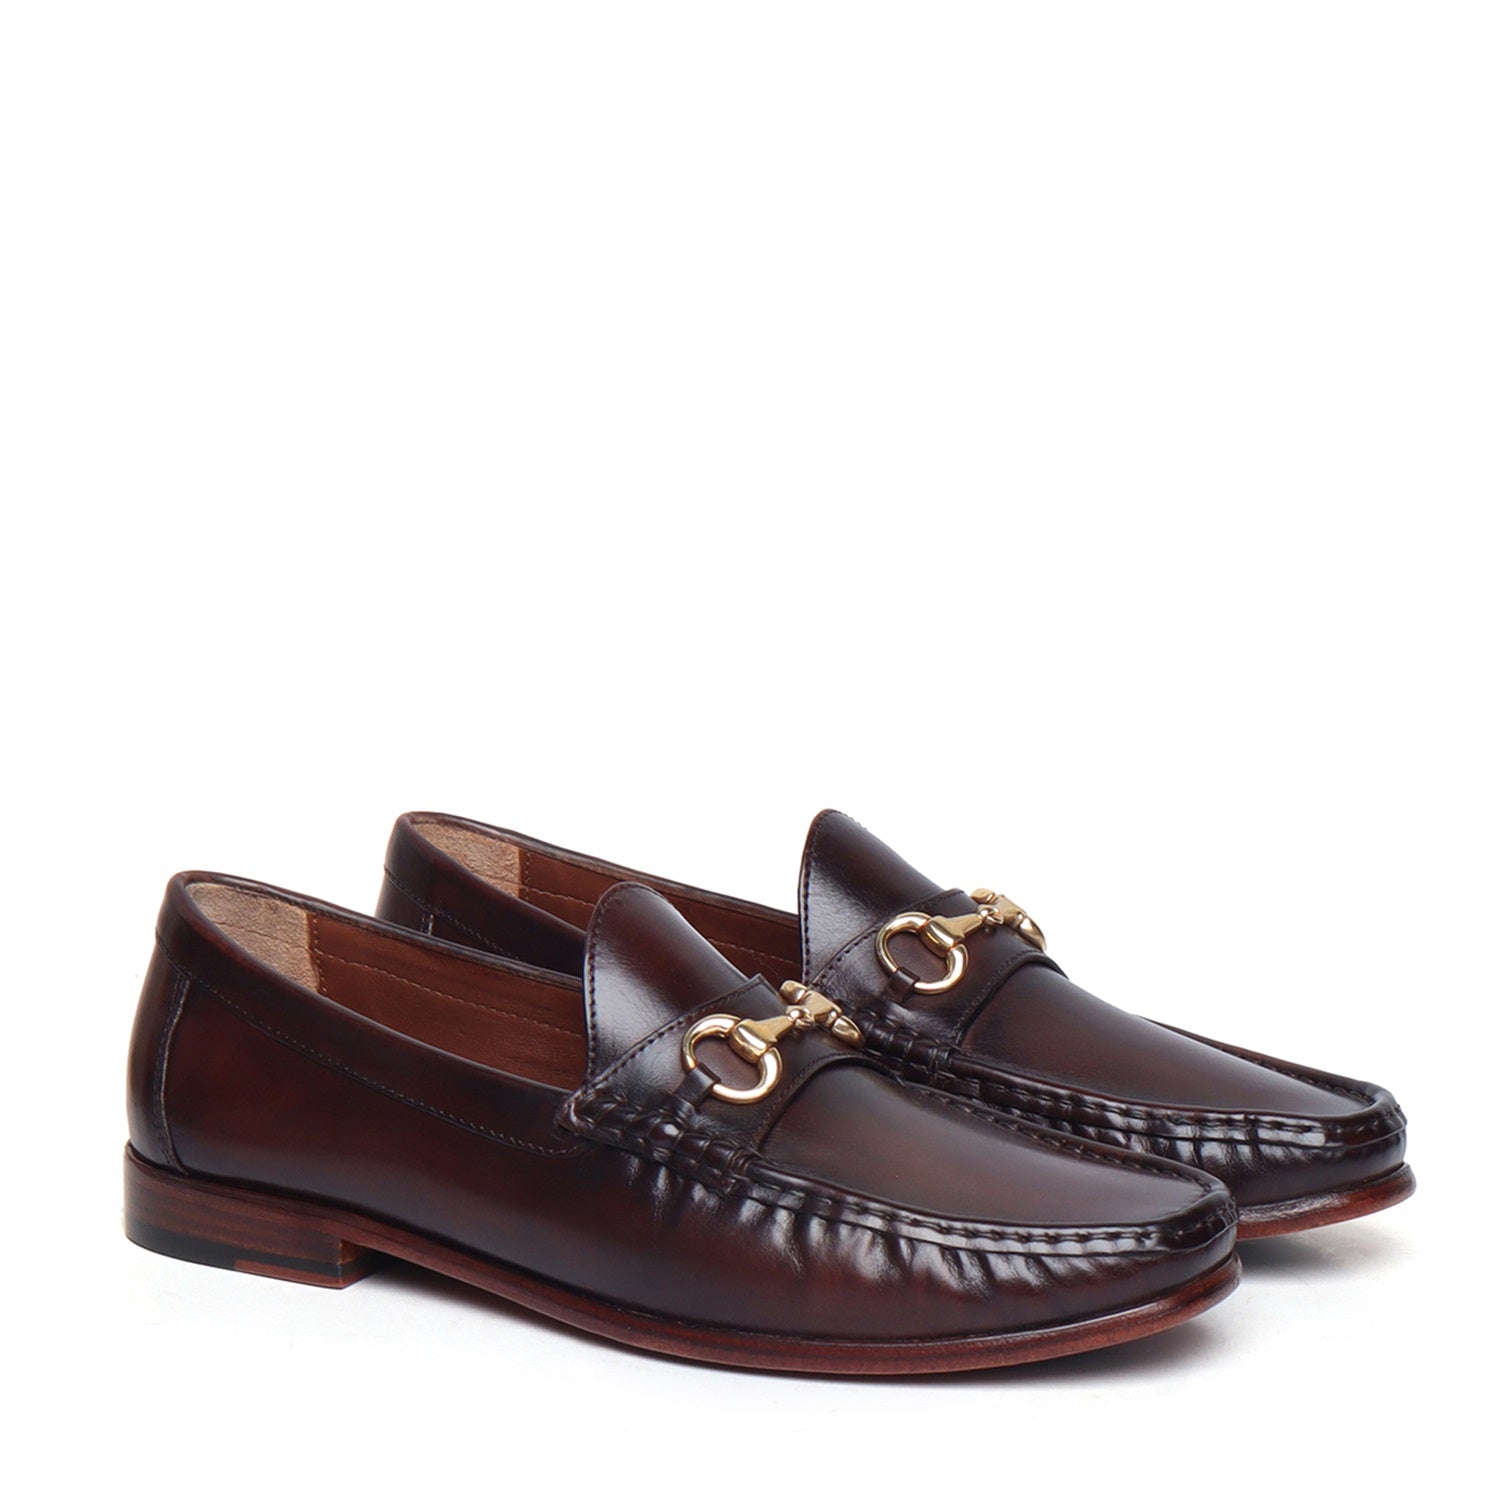 Brown Horse-bit With Leather Sole Loafers by Brune & Bareskin